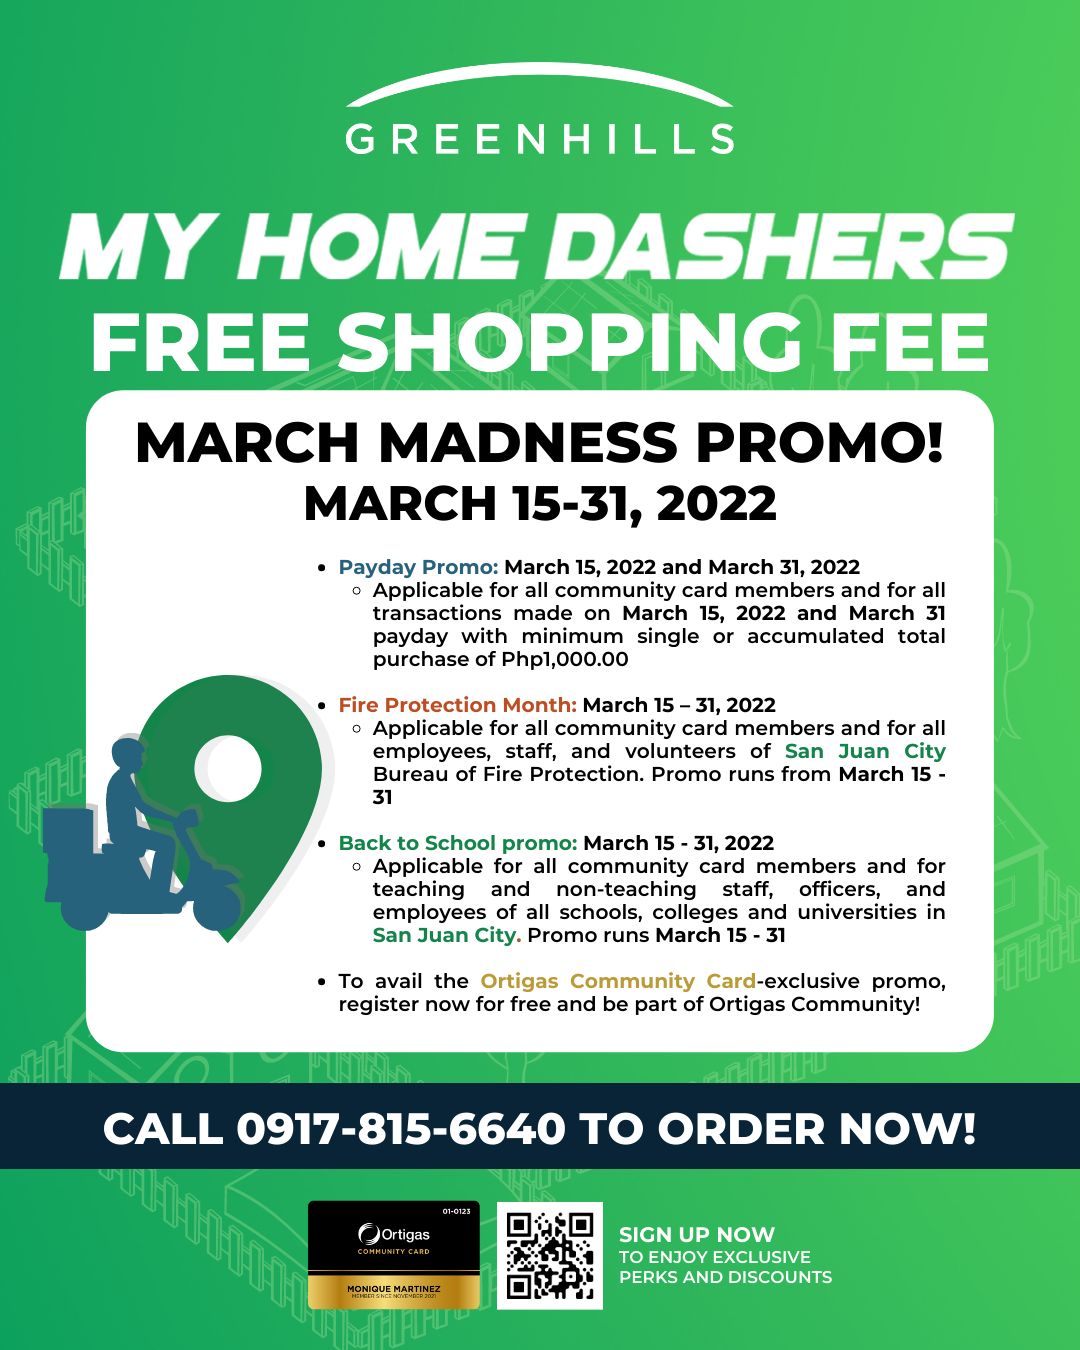 My Home Dashers: March Madness Promo!